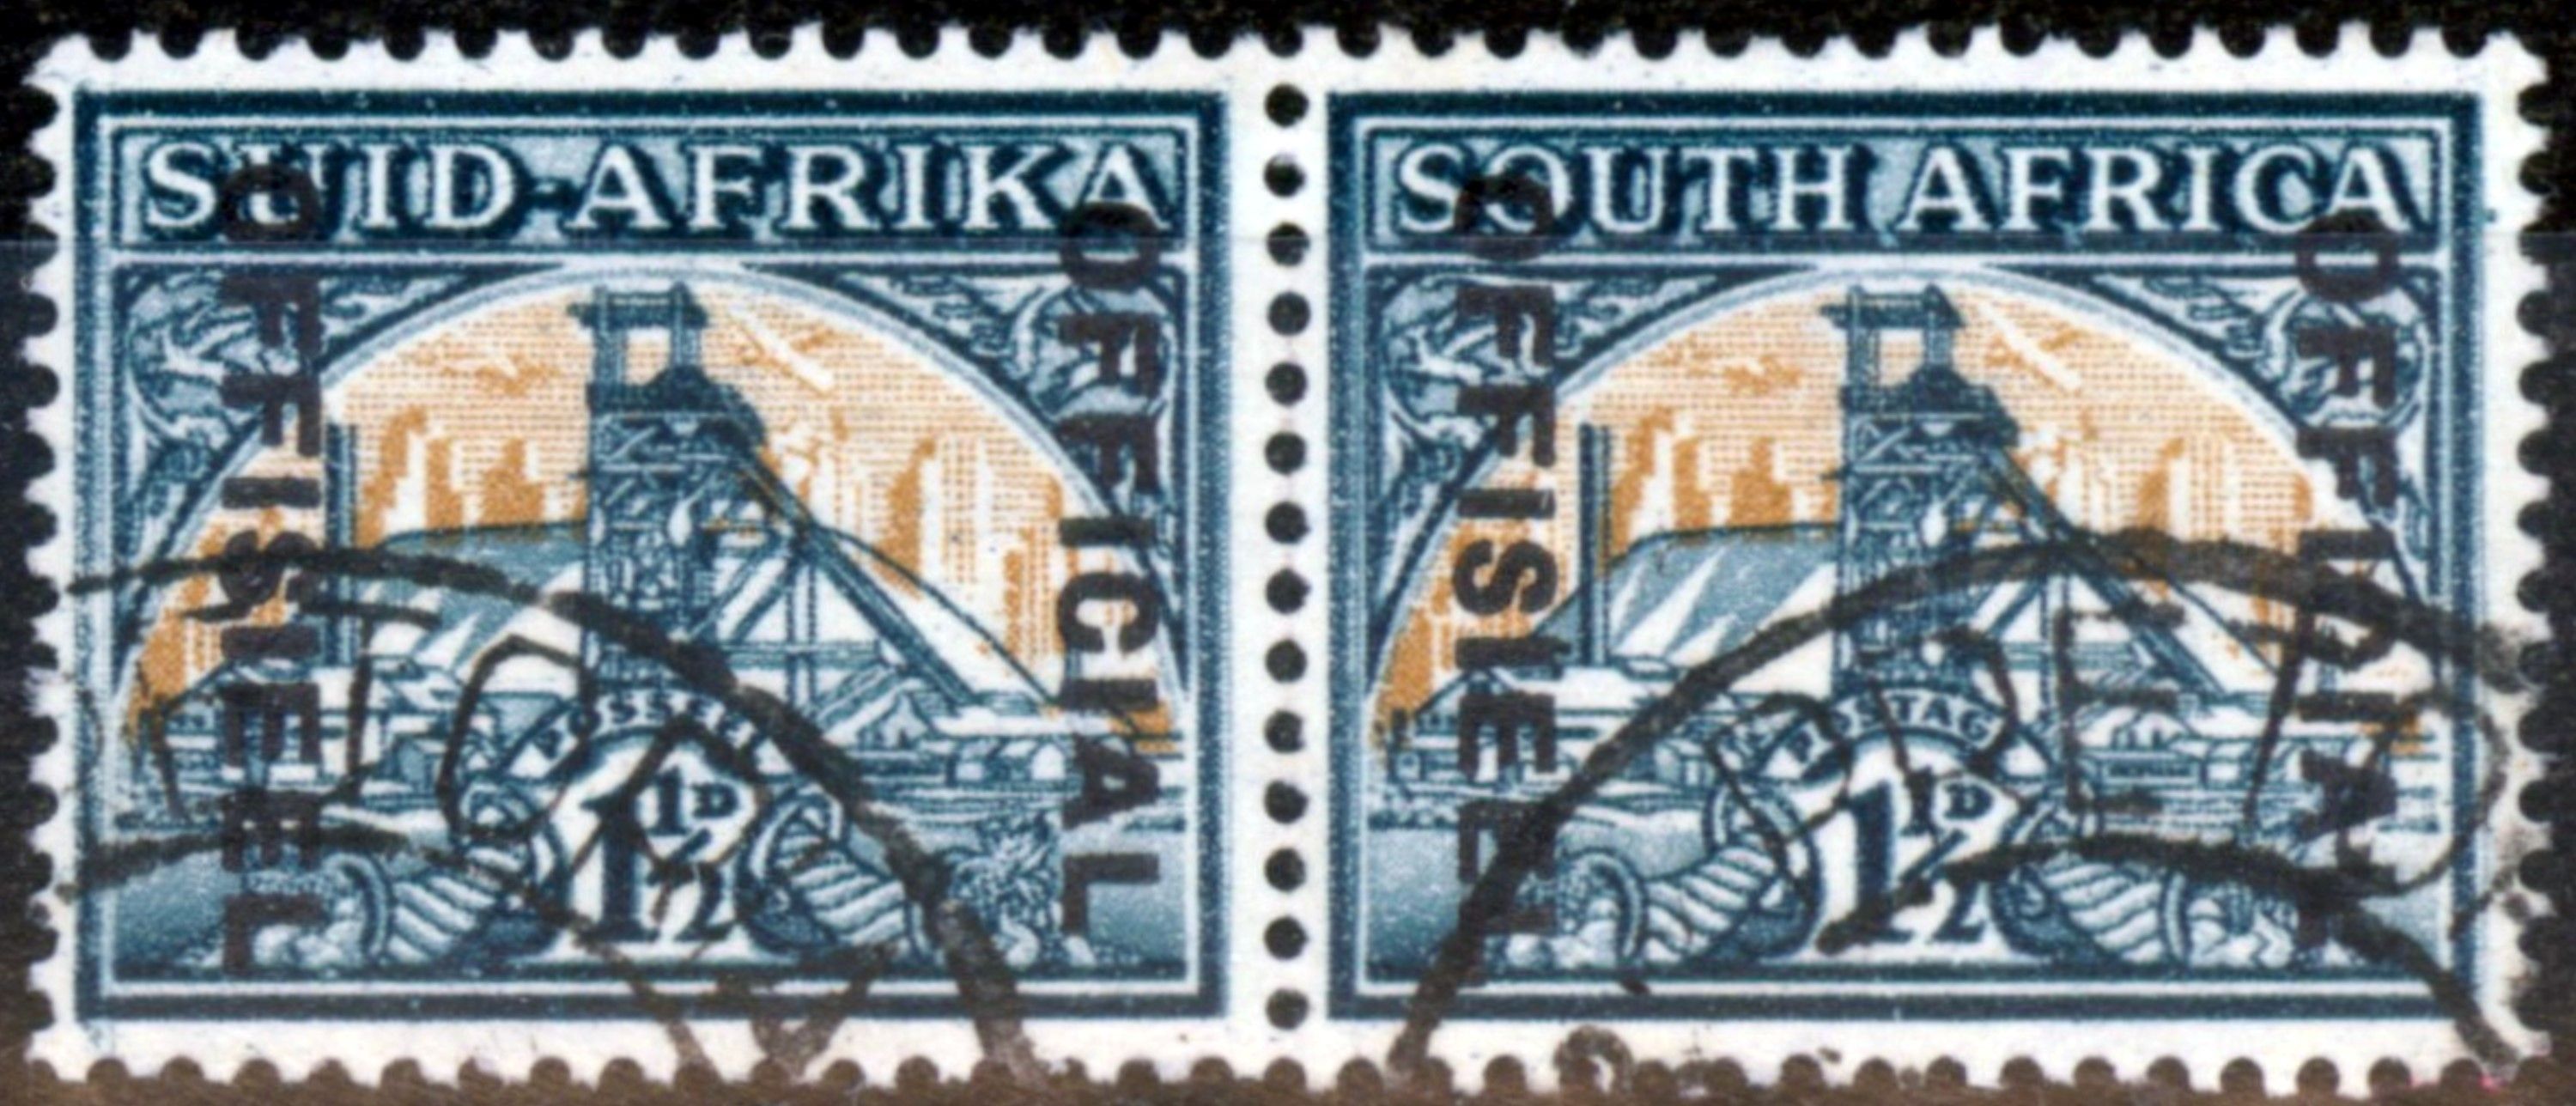 6 Buff South Africa 1944 1 1/2d Blue-Green & Yellow-Buff SG033 Fine Used 